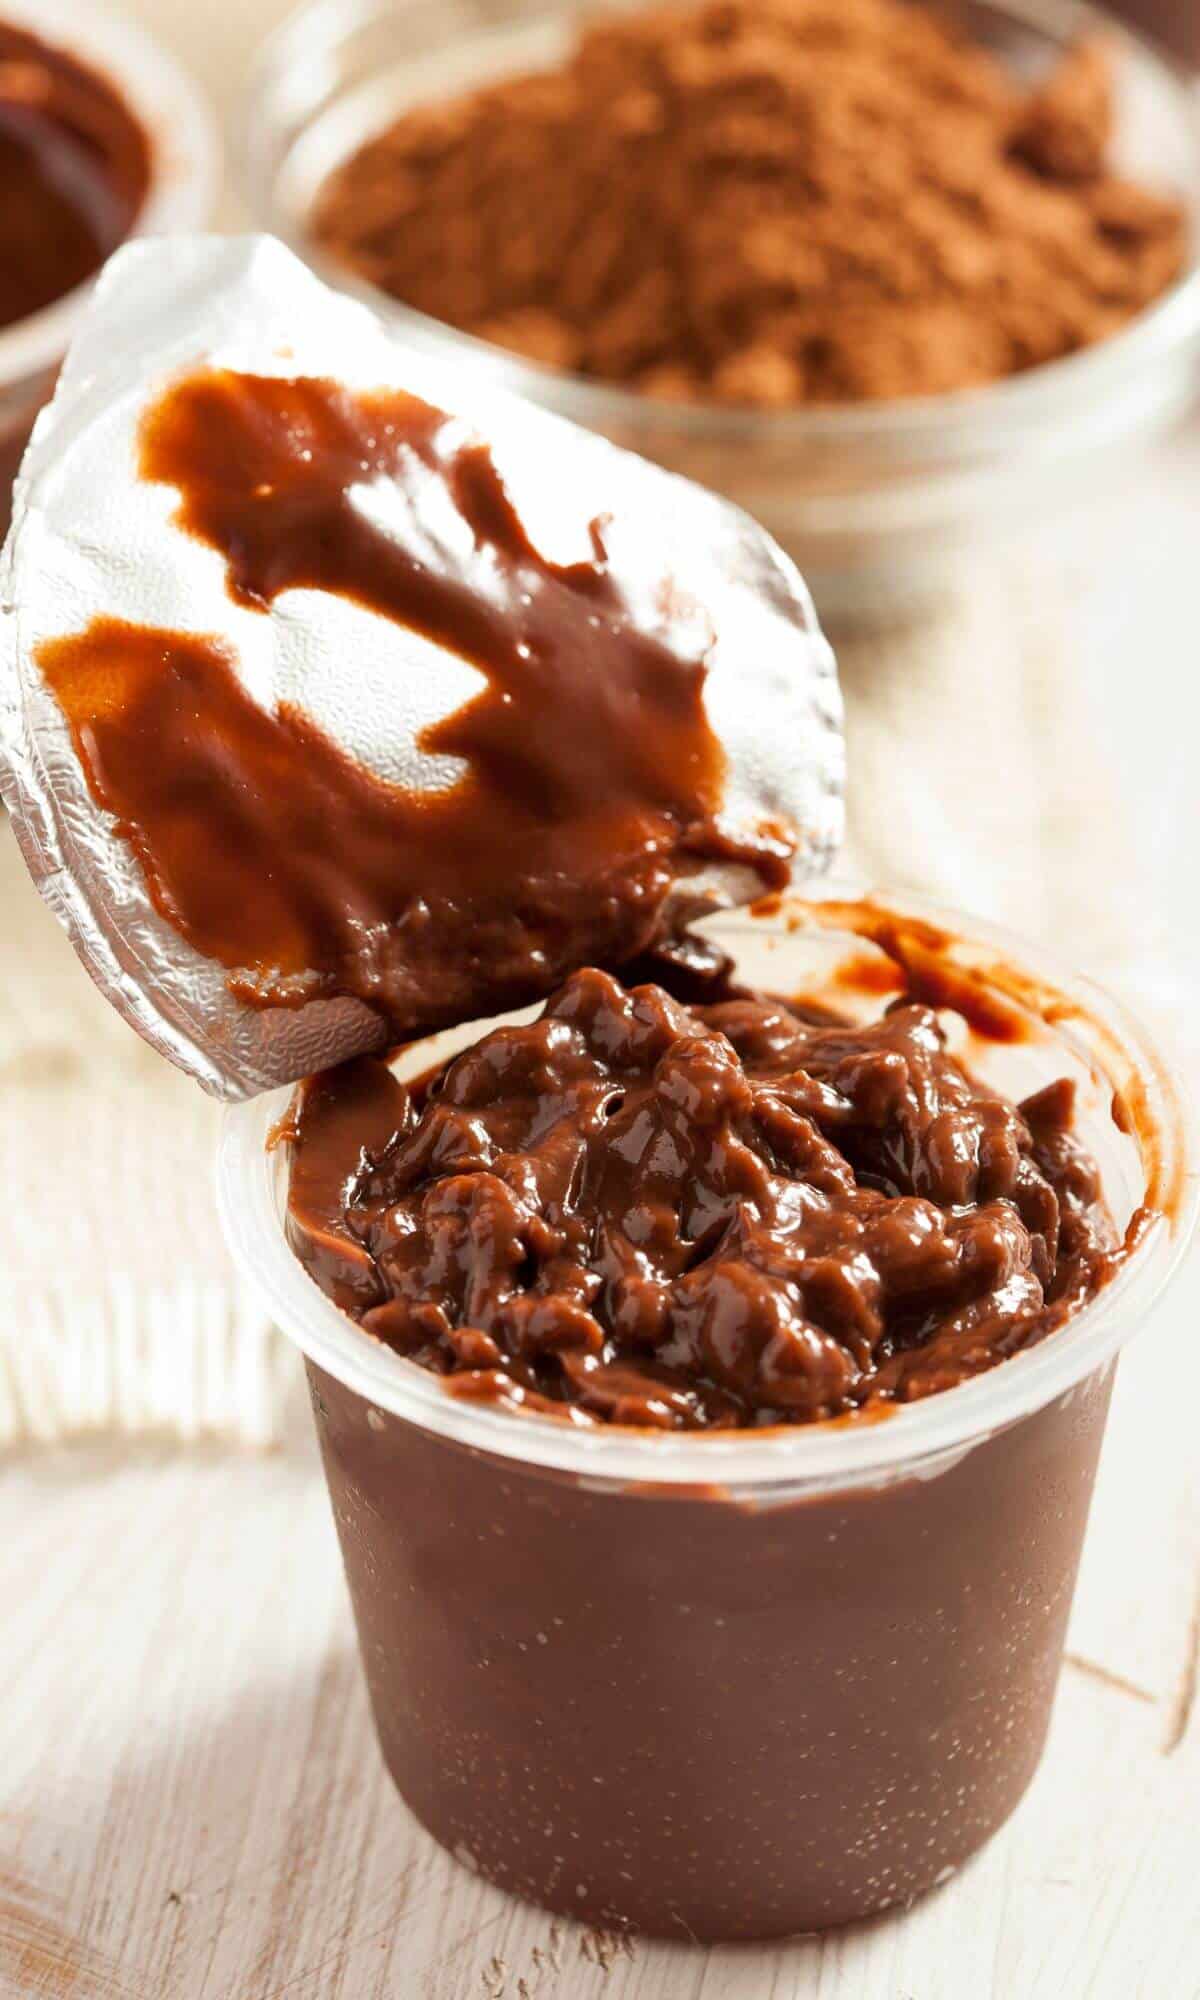 An open container of chocolate Hunt's Snack Pack pudding.